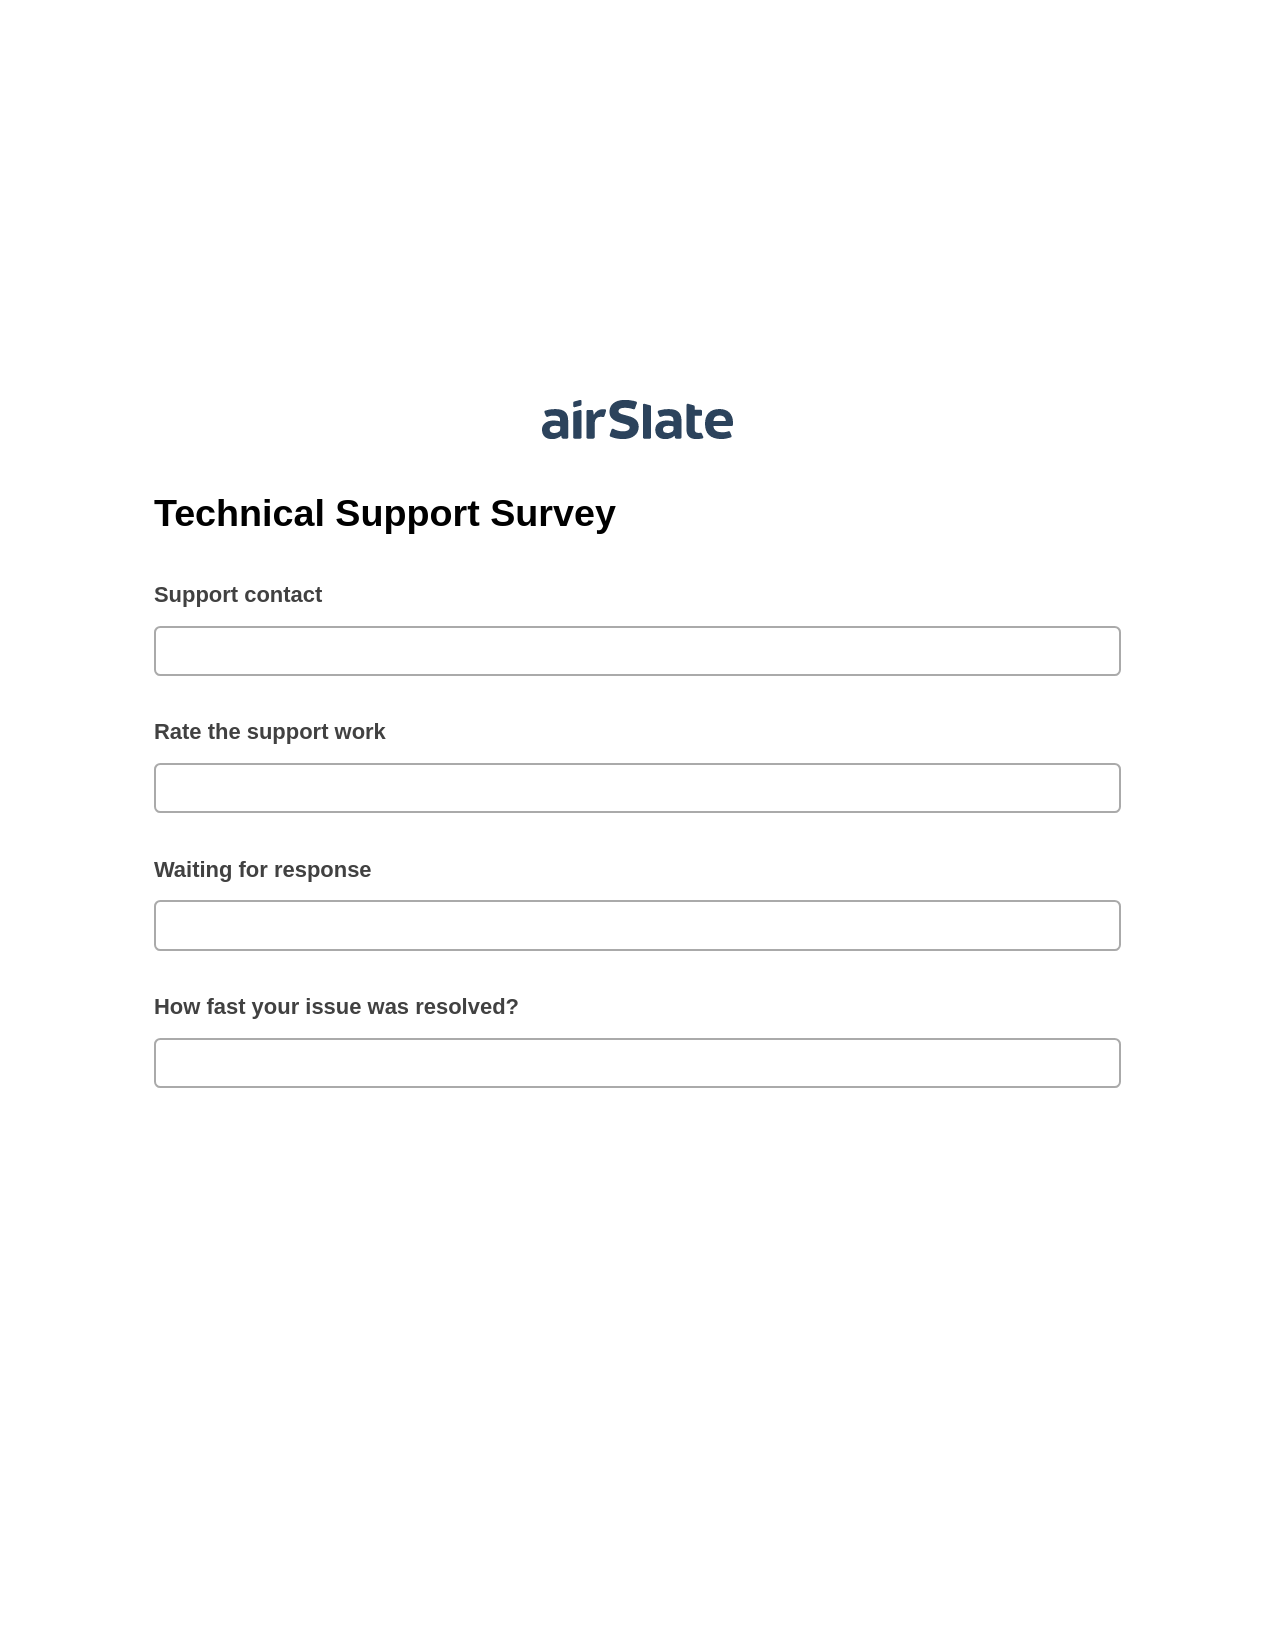 Technical Support Survey Pre-fill from Excel Spreadsheet Bot, Text Message Notification Bot, Export to WebMerge Bot